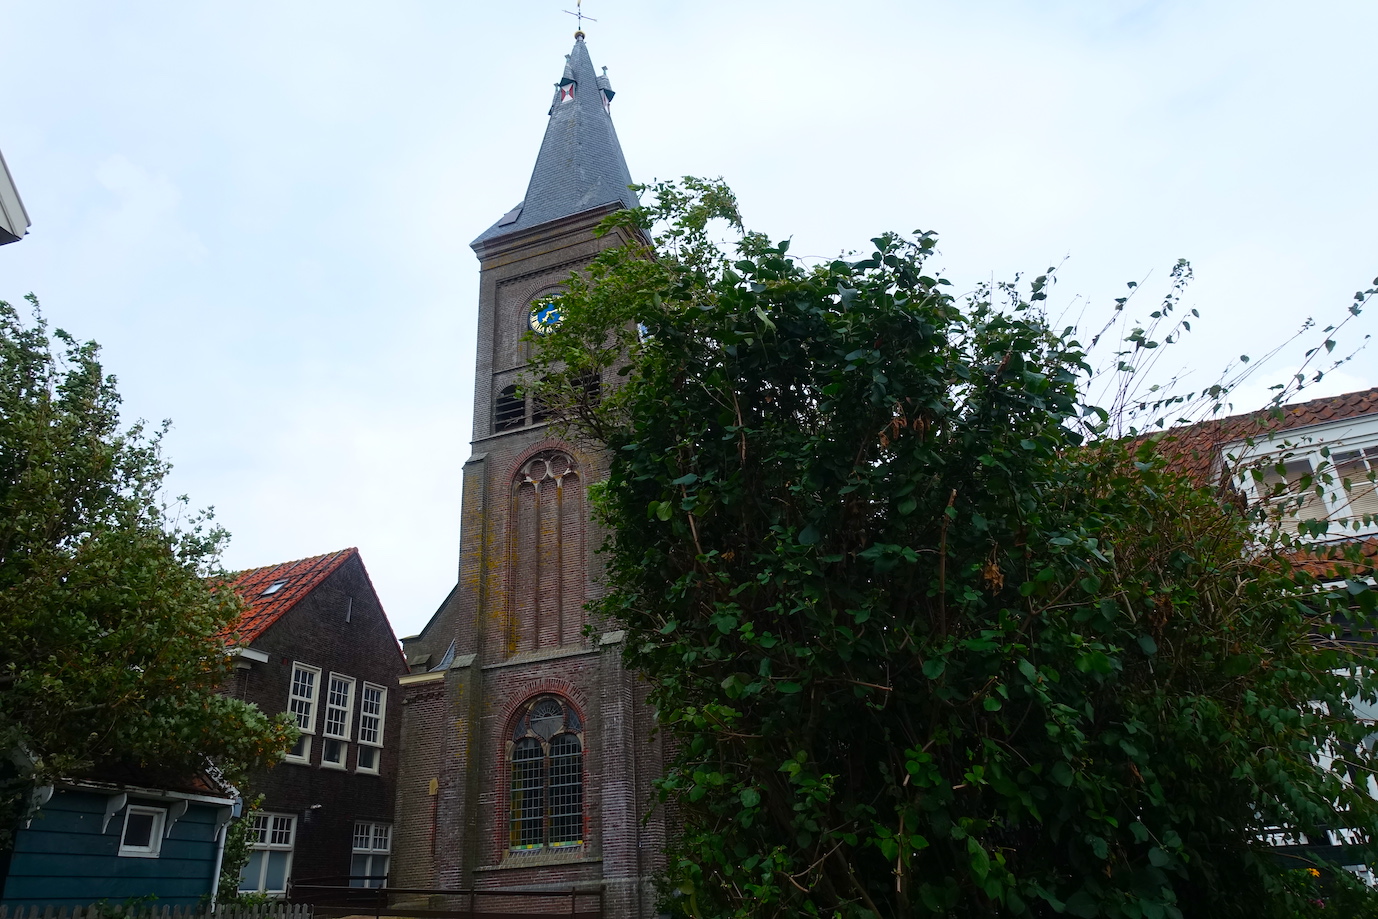 A view of the Marken Grote Kerk with some green trees